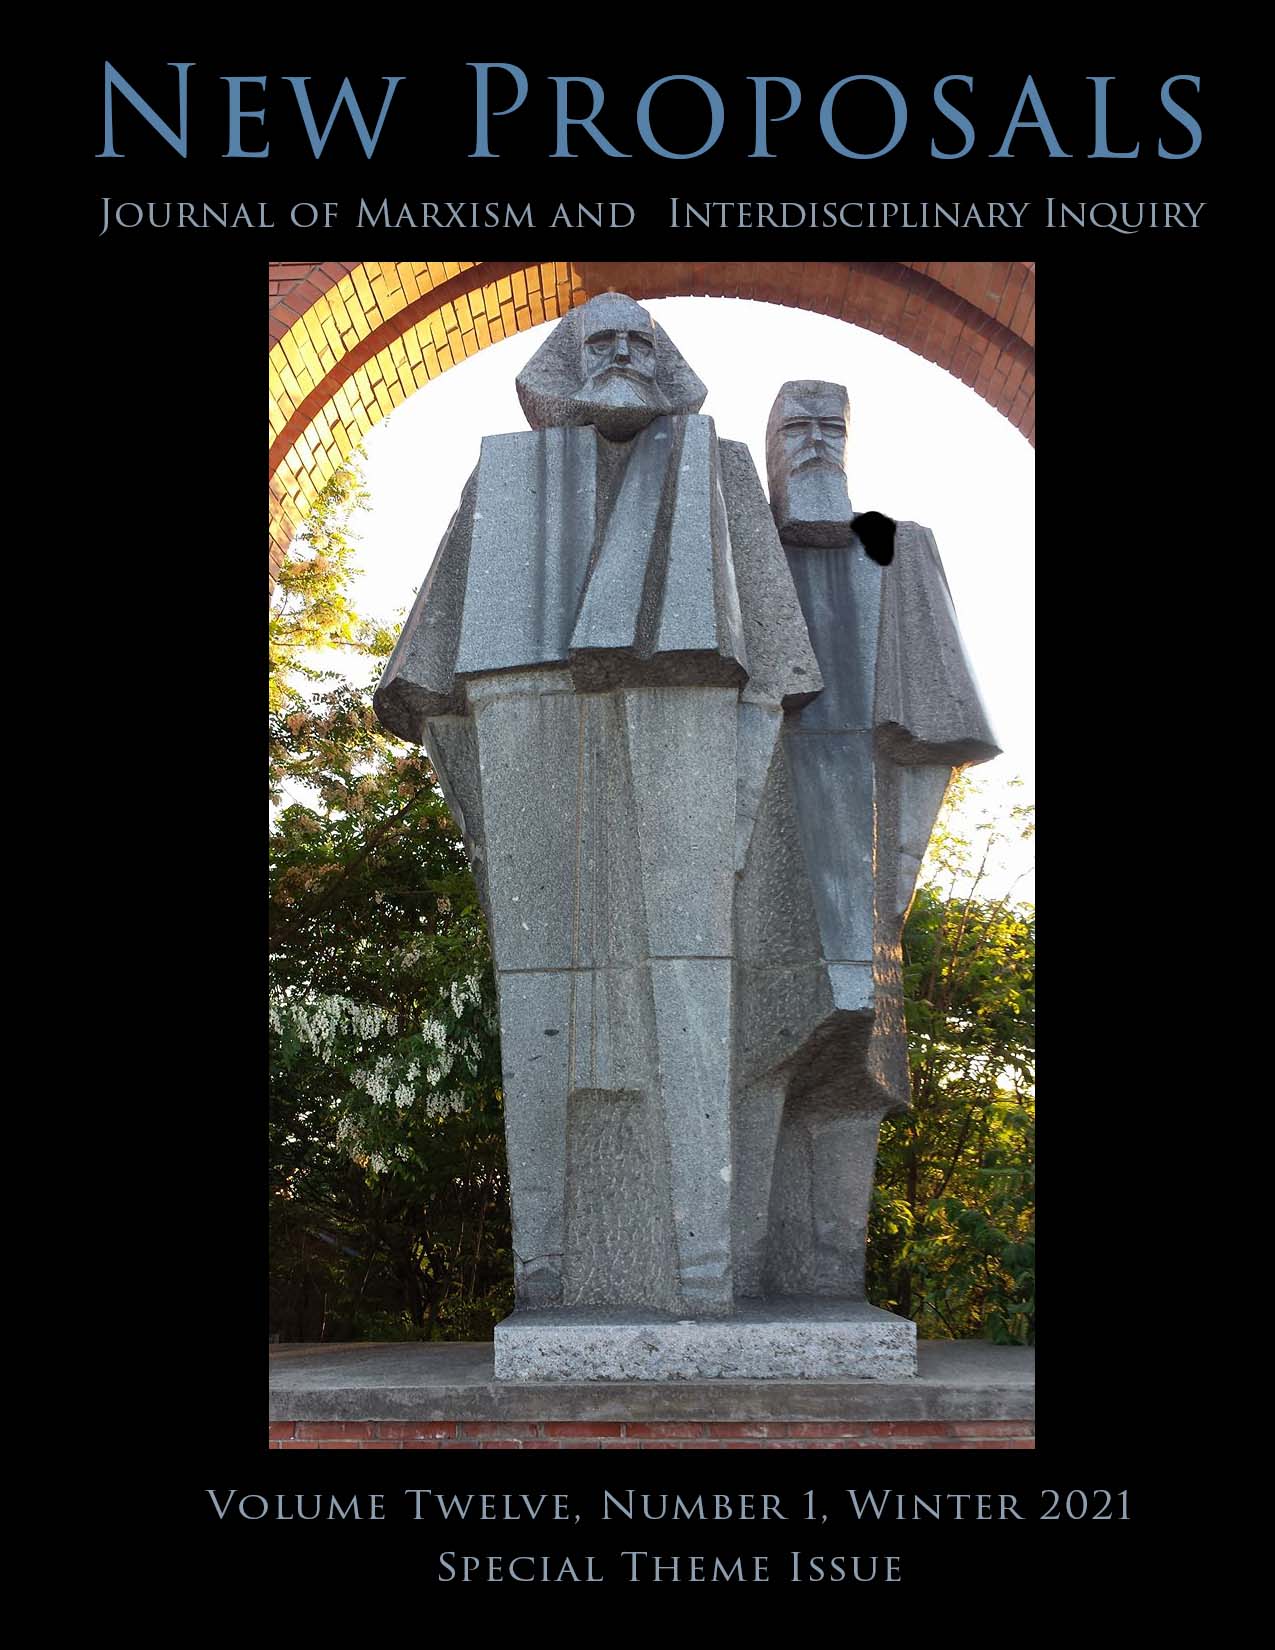 The cover of New Proposals volume twelve, number 1, winter 2021, with a picture of a statue of Marx and Engels in Budapest Hungary